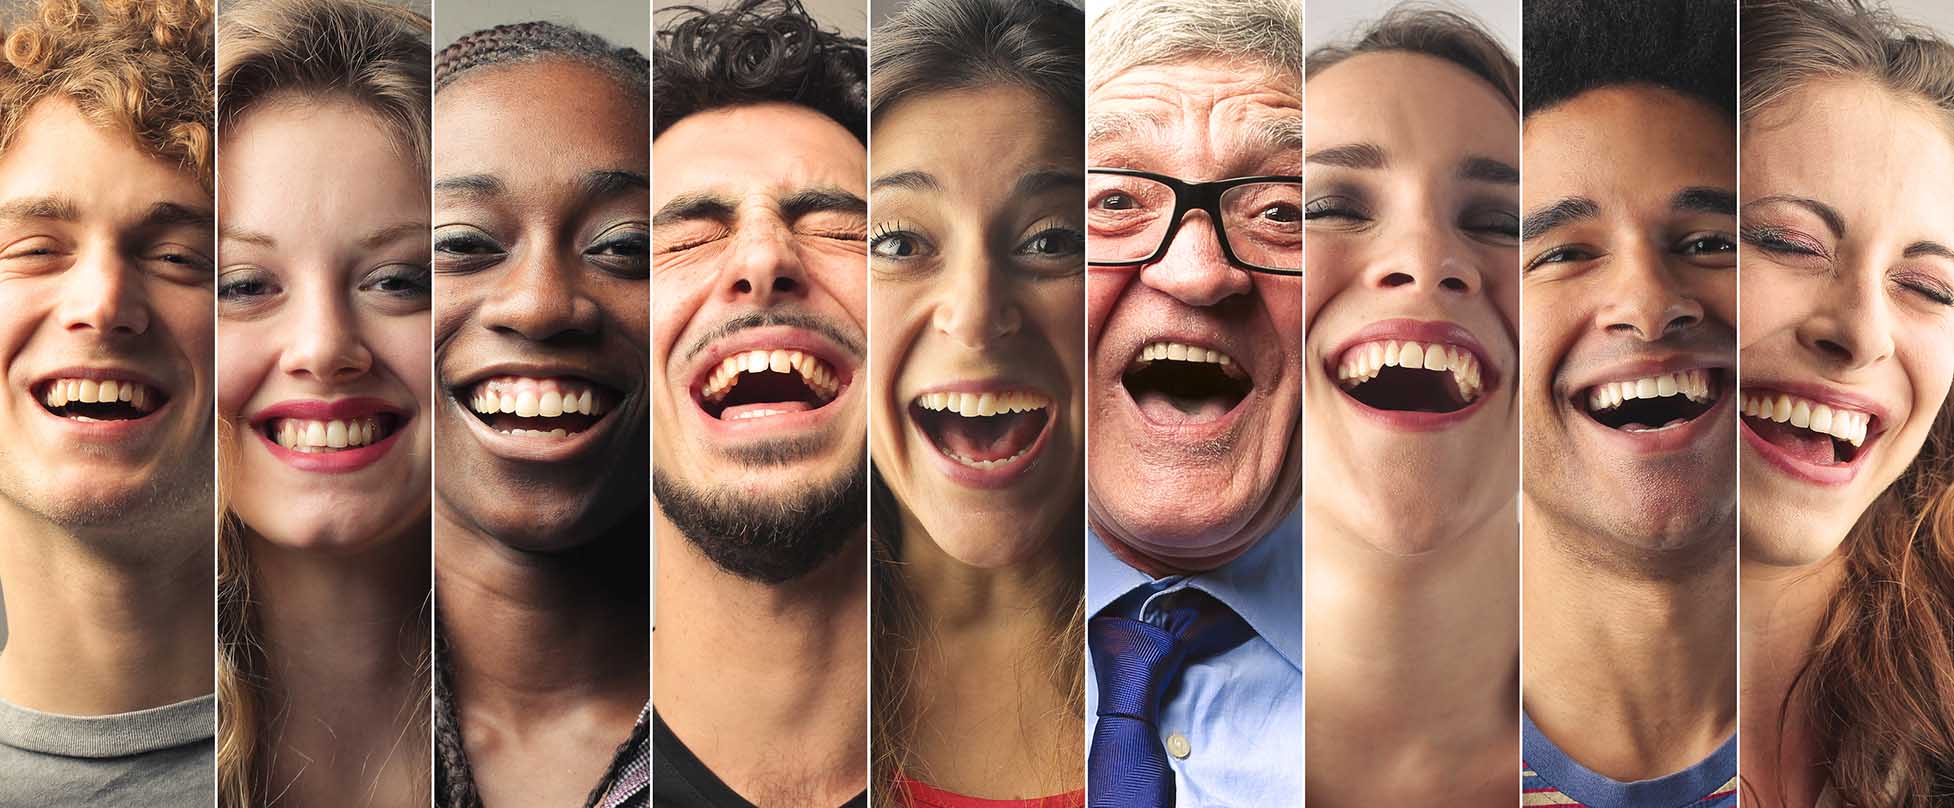 People - Group - Laughing People Diverse_94940024